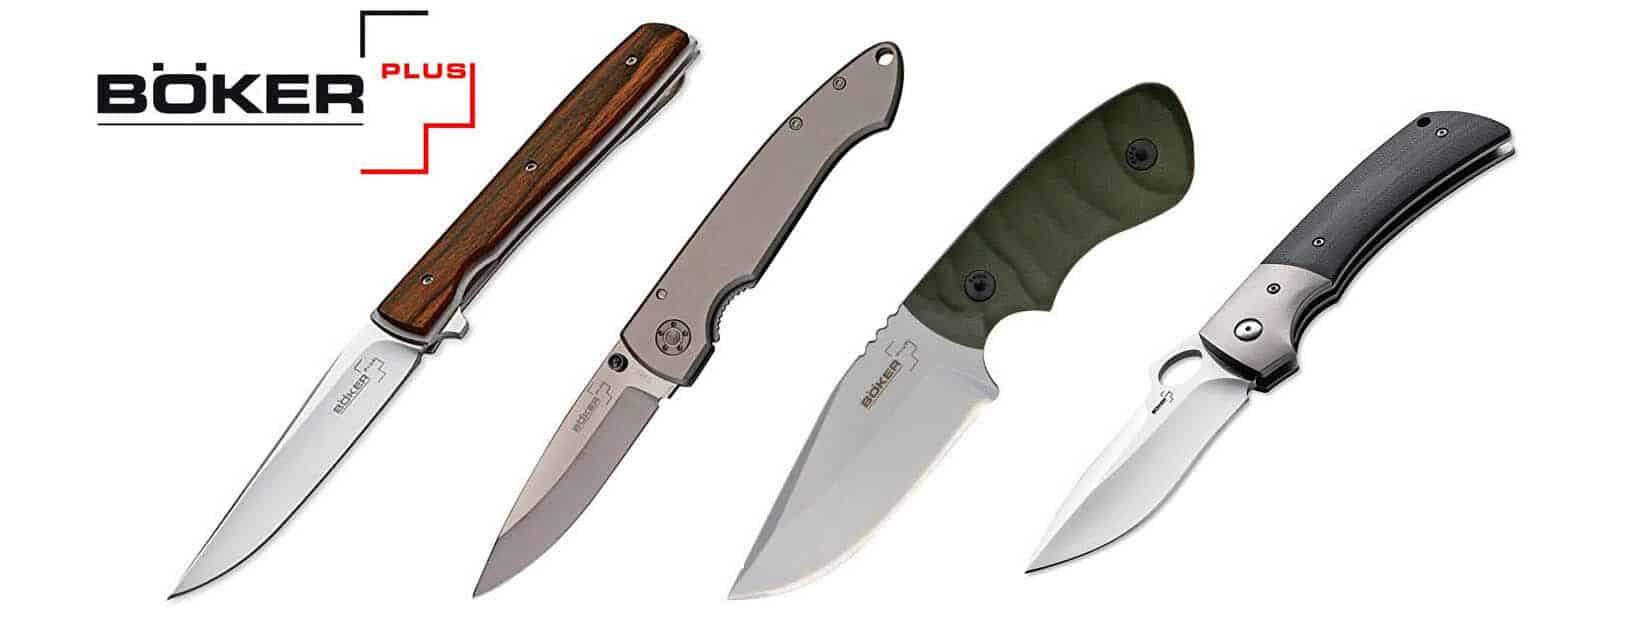 Boker Plus makes mid range knives that are a happy medium between price and quality.